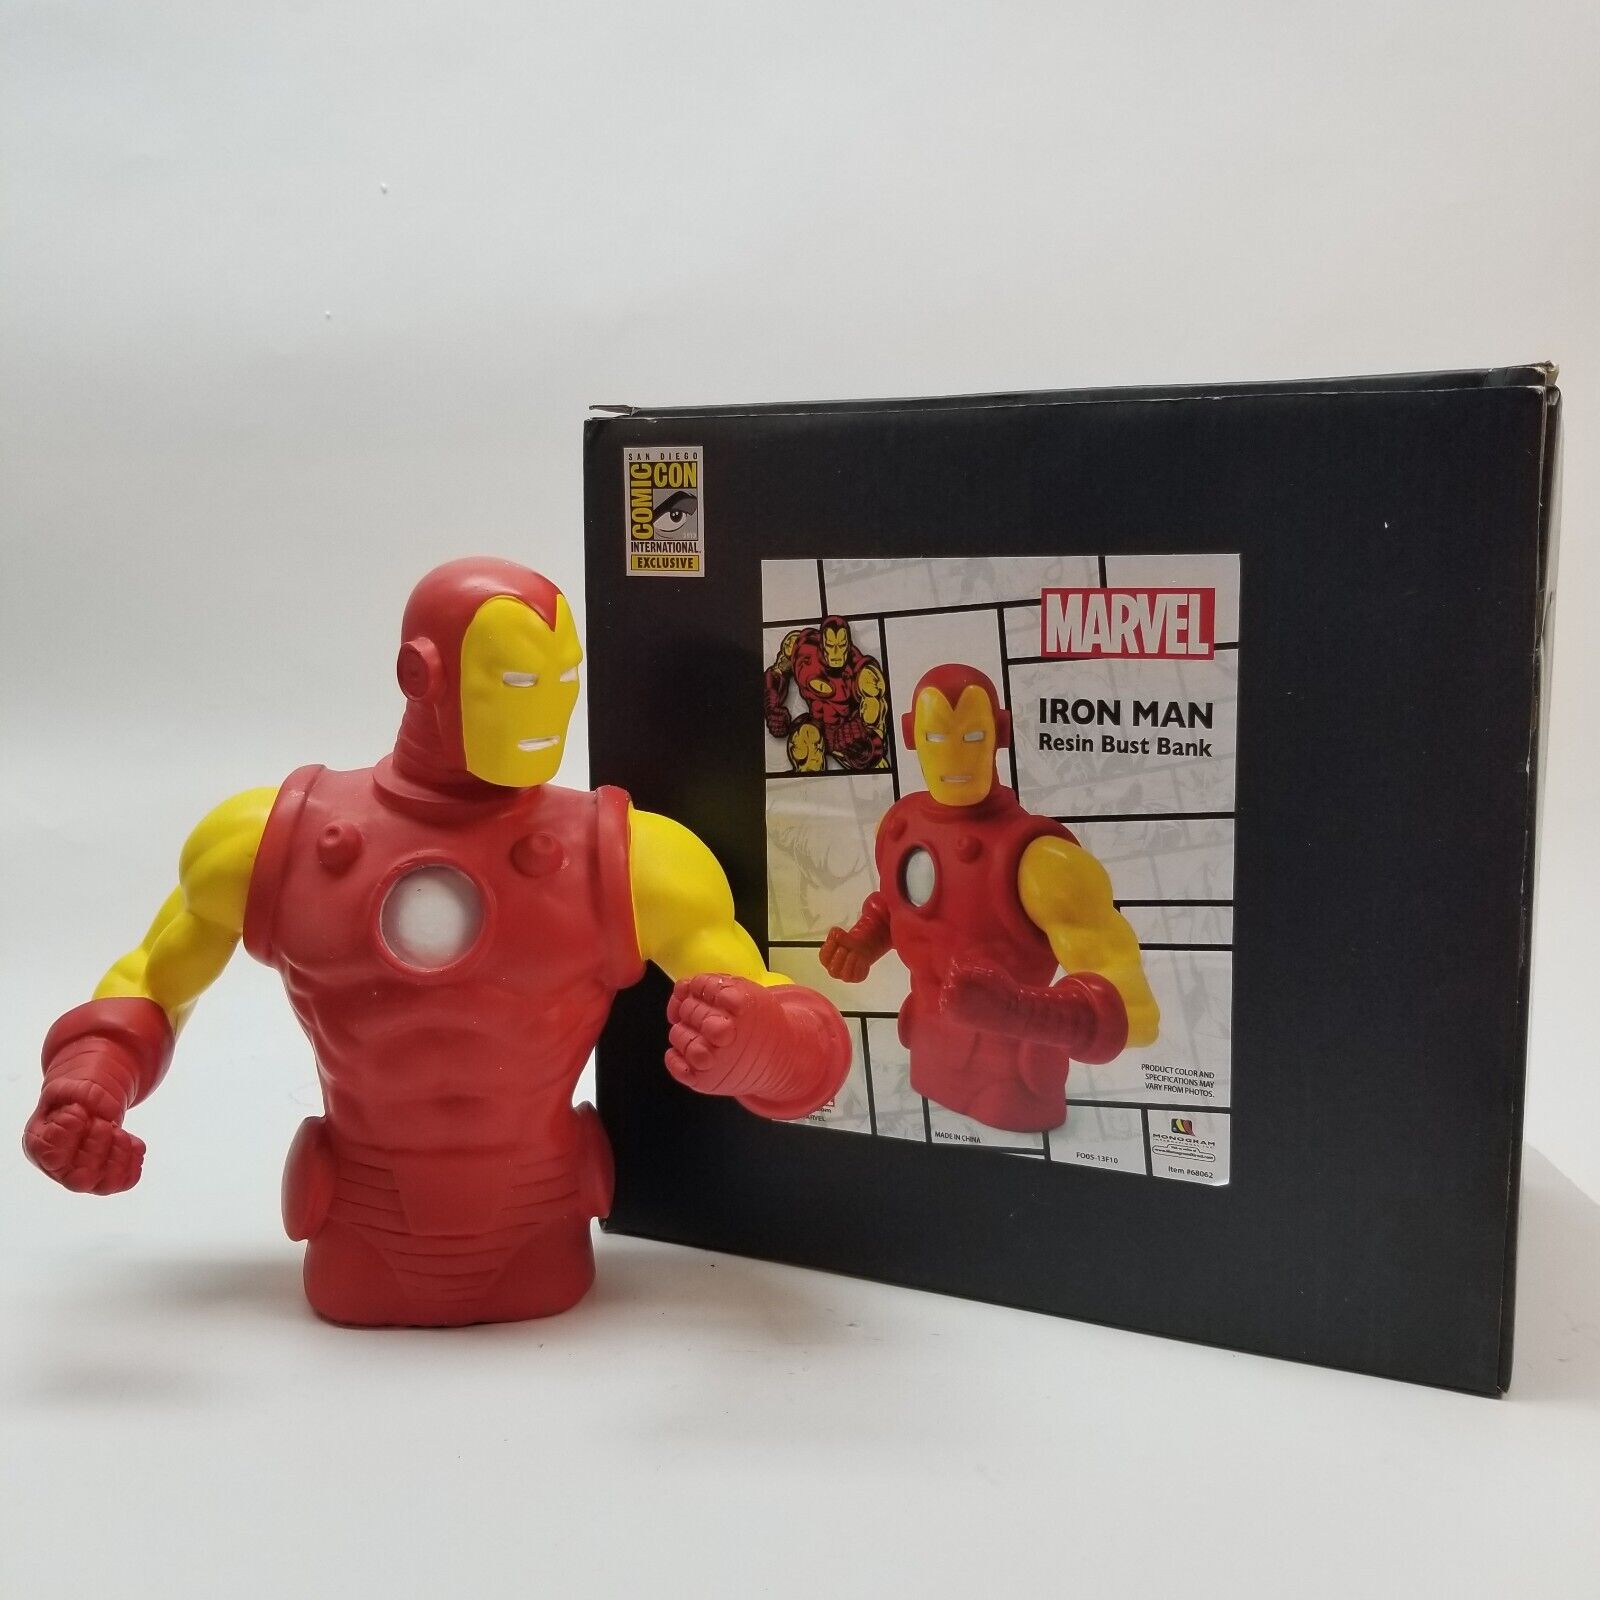 Marvel Iron Man Resin Bust Bank SDCC 2013 Collectible w/Box San Diego Comic Con